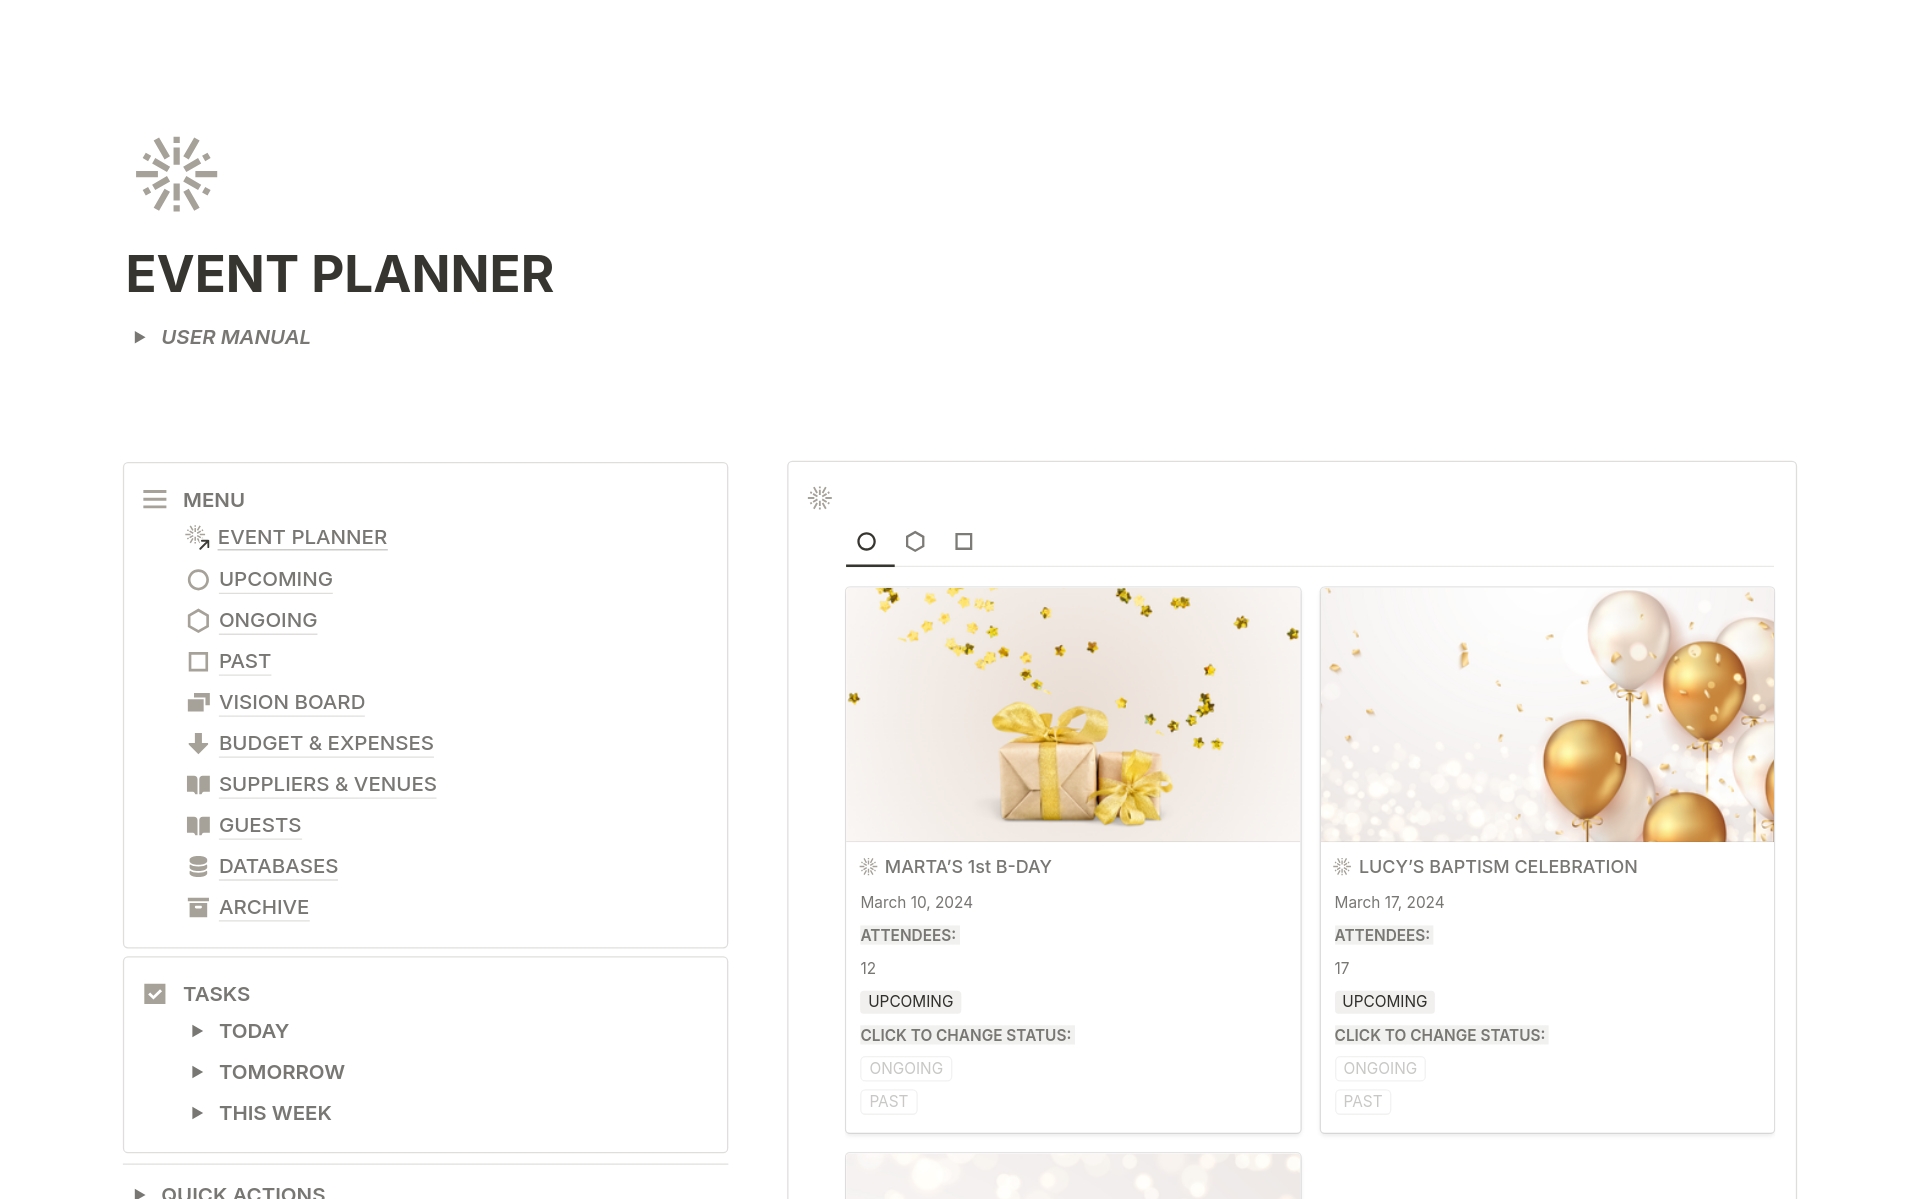 The Event Planner streamlines event organization with sections for upcoming, ongoing, and past events. Features include pages for guest details, venues, budget tracking, and a vision board. It also offers specific pages for each event, covering sites, schedules, invitations,